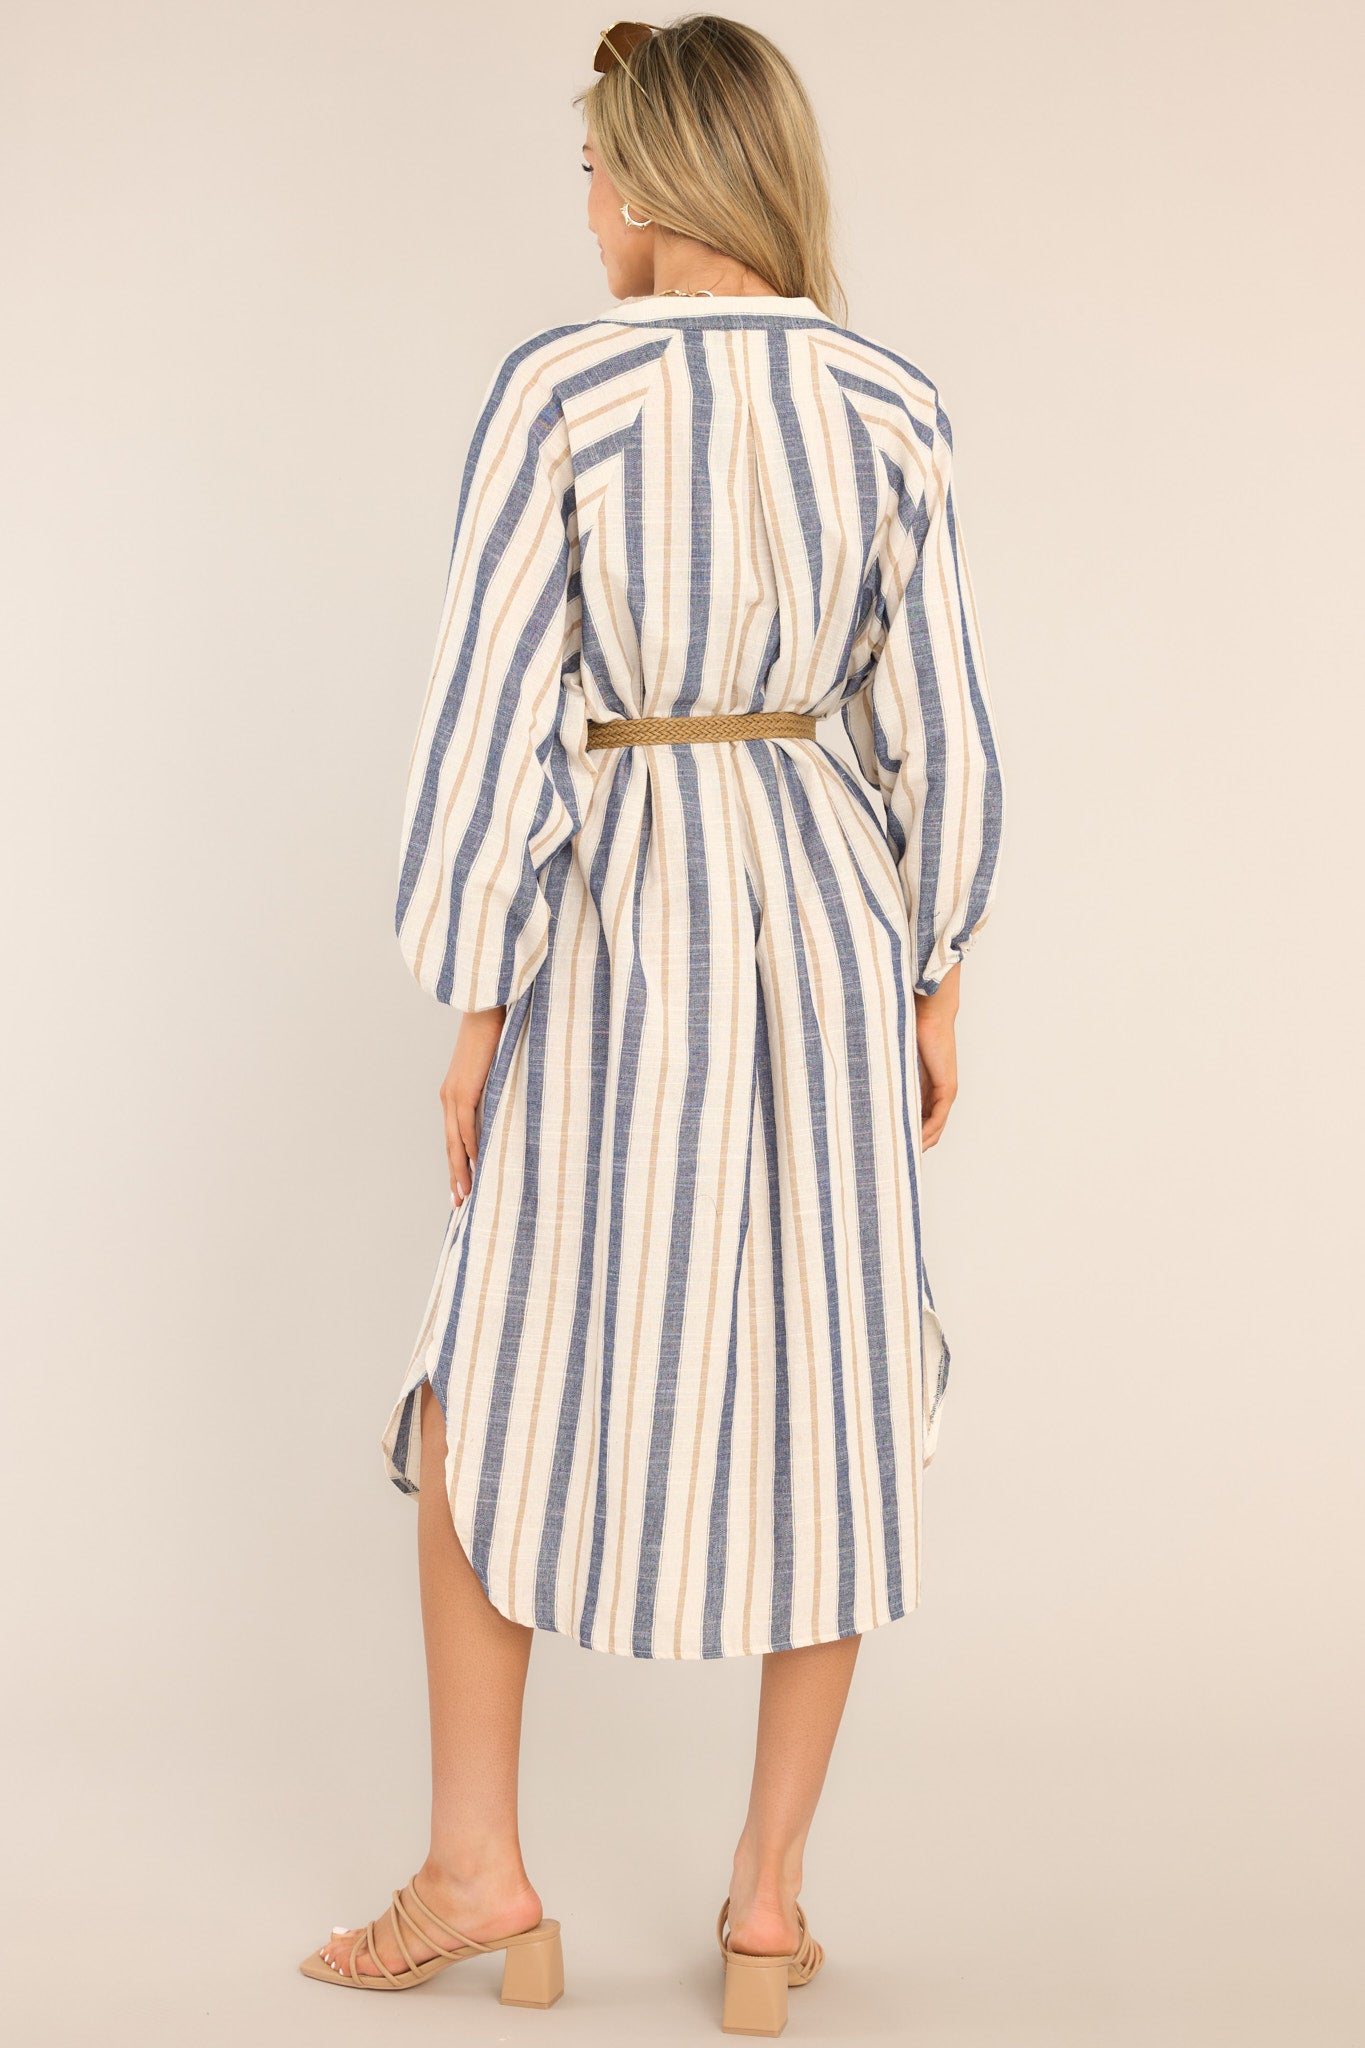 Back view of this dress that features a v-neckline, belt loops, an adjustable belt, functional pockets, elastic cuffed long sleeves, and a vertical striped pattern.